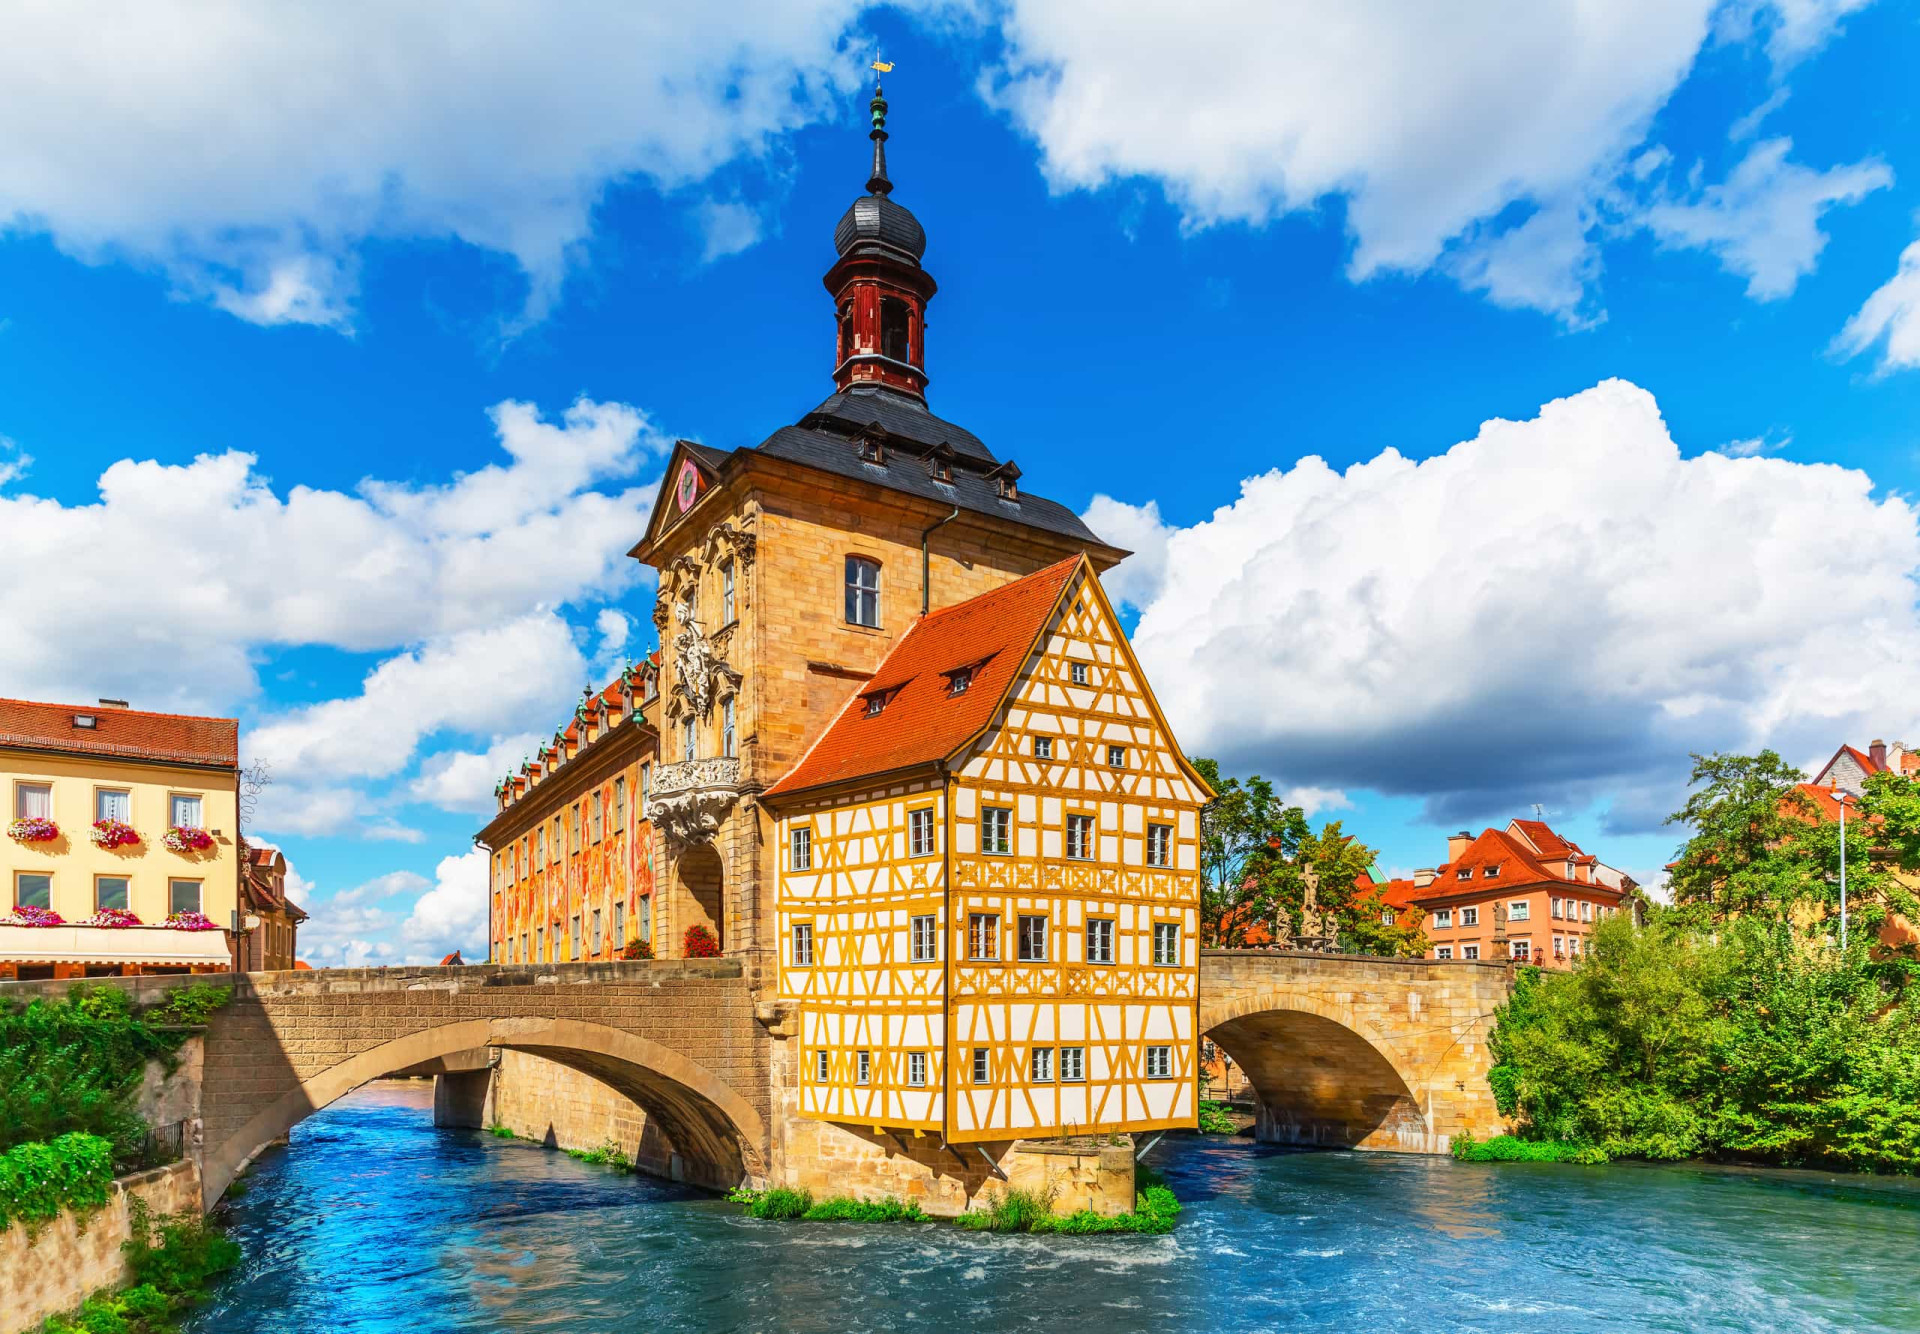 <p>Germany is blessed with numerous destinations that delight for their historic appeal and beautiful settings. From medieval towns and villages to resplendent <a href="https://www.starsinsider.com/travel/481206/the-most-opulent-royal-palaces-in-the-world" rel="noopener">palaces</a>, castles, and cathedrals, Germany has much to entice the visitor. And with a vast landscape that encompasses mountains, rivers, beaches, and forests, this really is a country of contrasts.</p><p>Click through and discover these delightful German destinations.</p><p>You may also like:<a href="https://www.starsinsider.com/n/188976?utm_source=msn.com&utm_medium=display&utm_campaign=referral_description&utm_content=481885v1en-us"> Adorable photos of celebrity mums!</a></p>